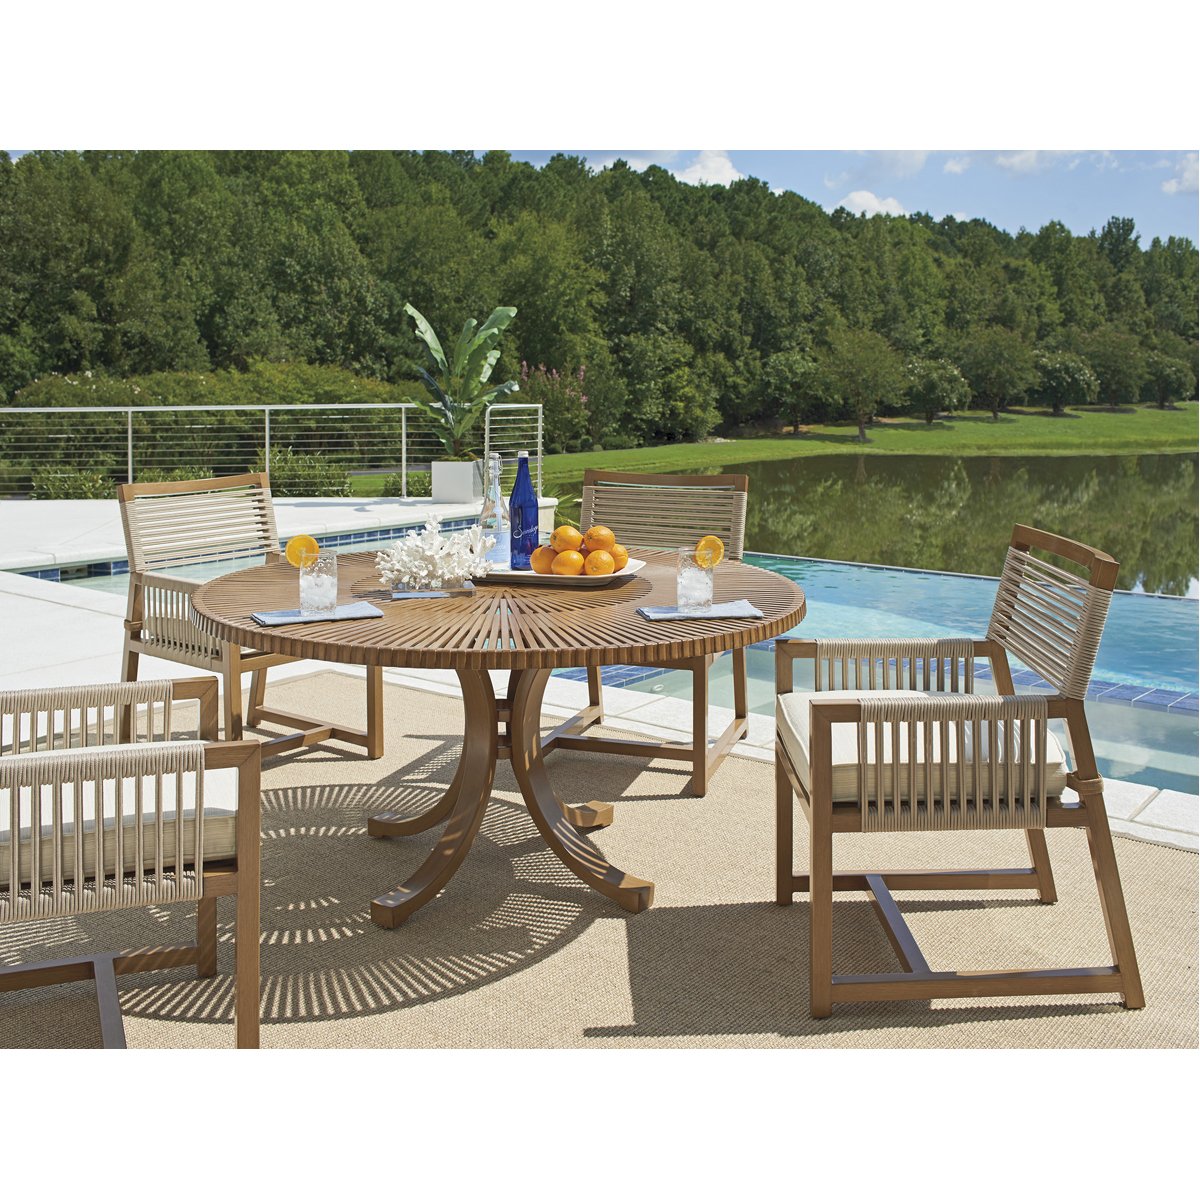 Tommy Bahama St Tropez Round Outdoor Dining Table